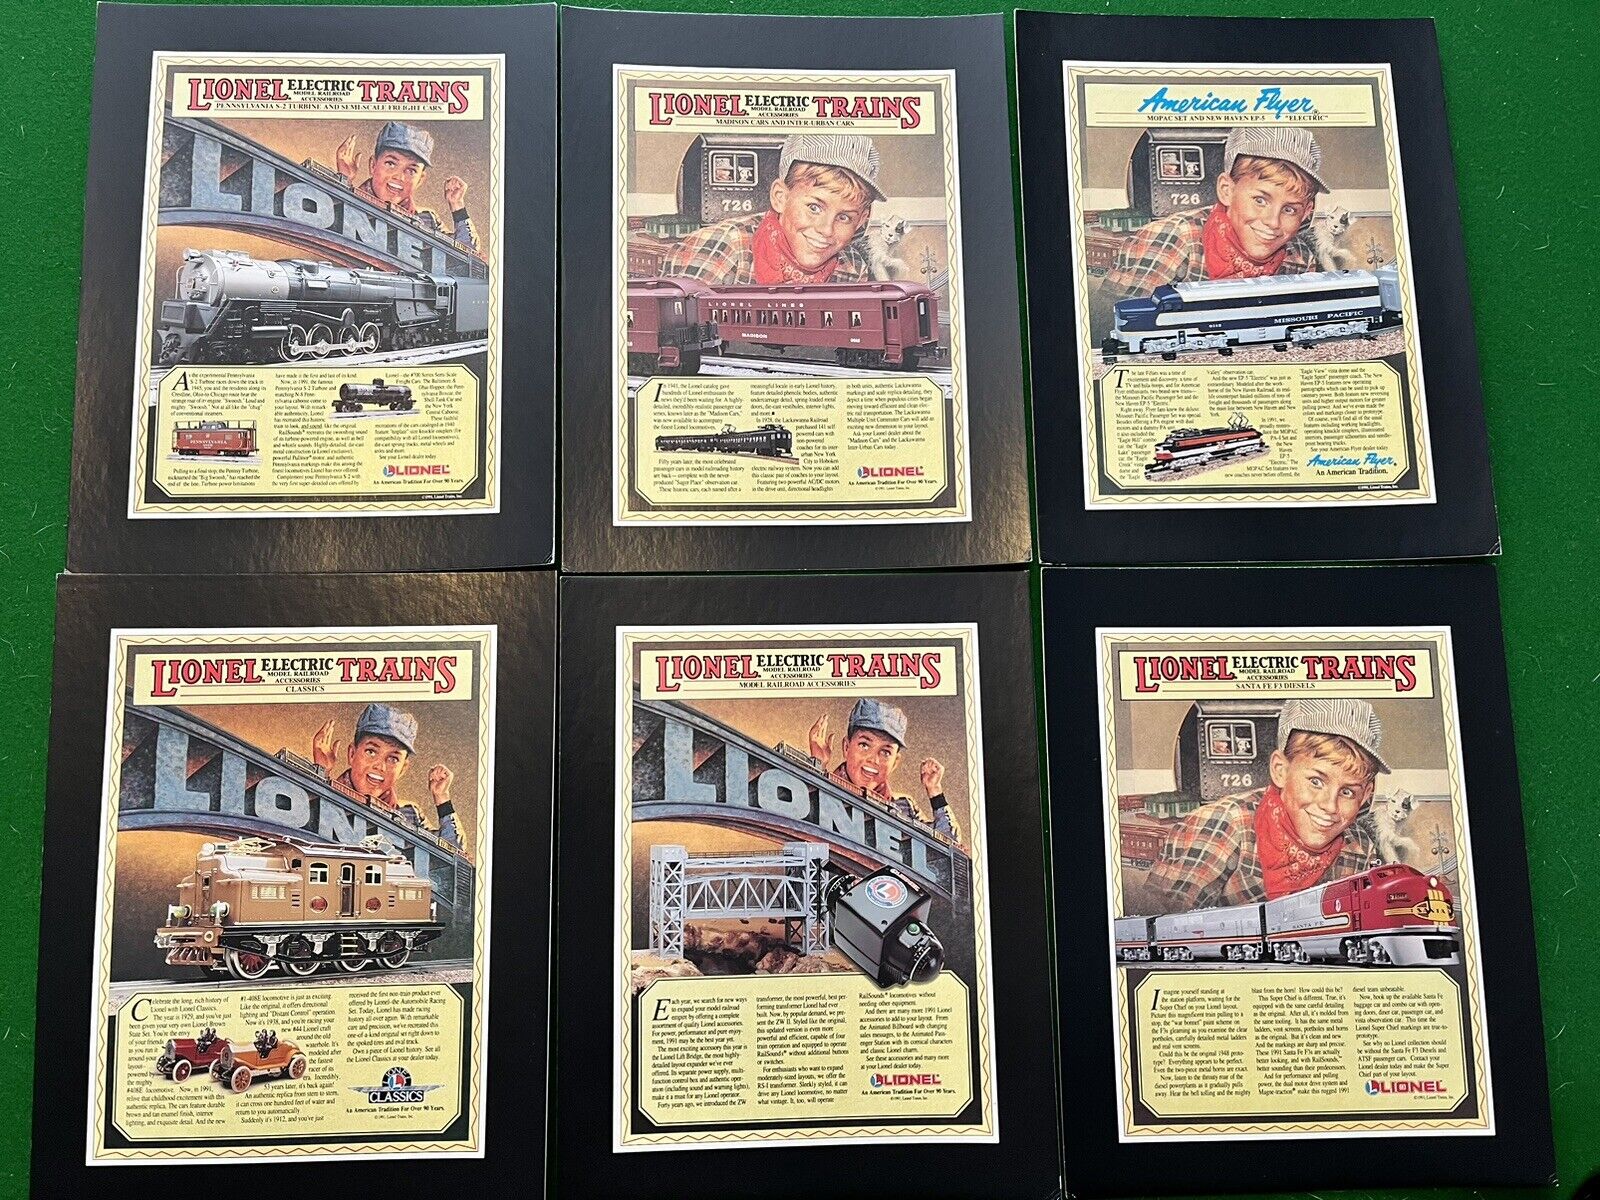 Lionel 1991 Advertising Posters - ready for framing- unused